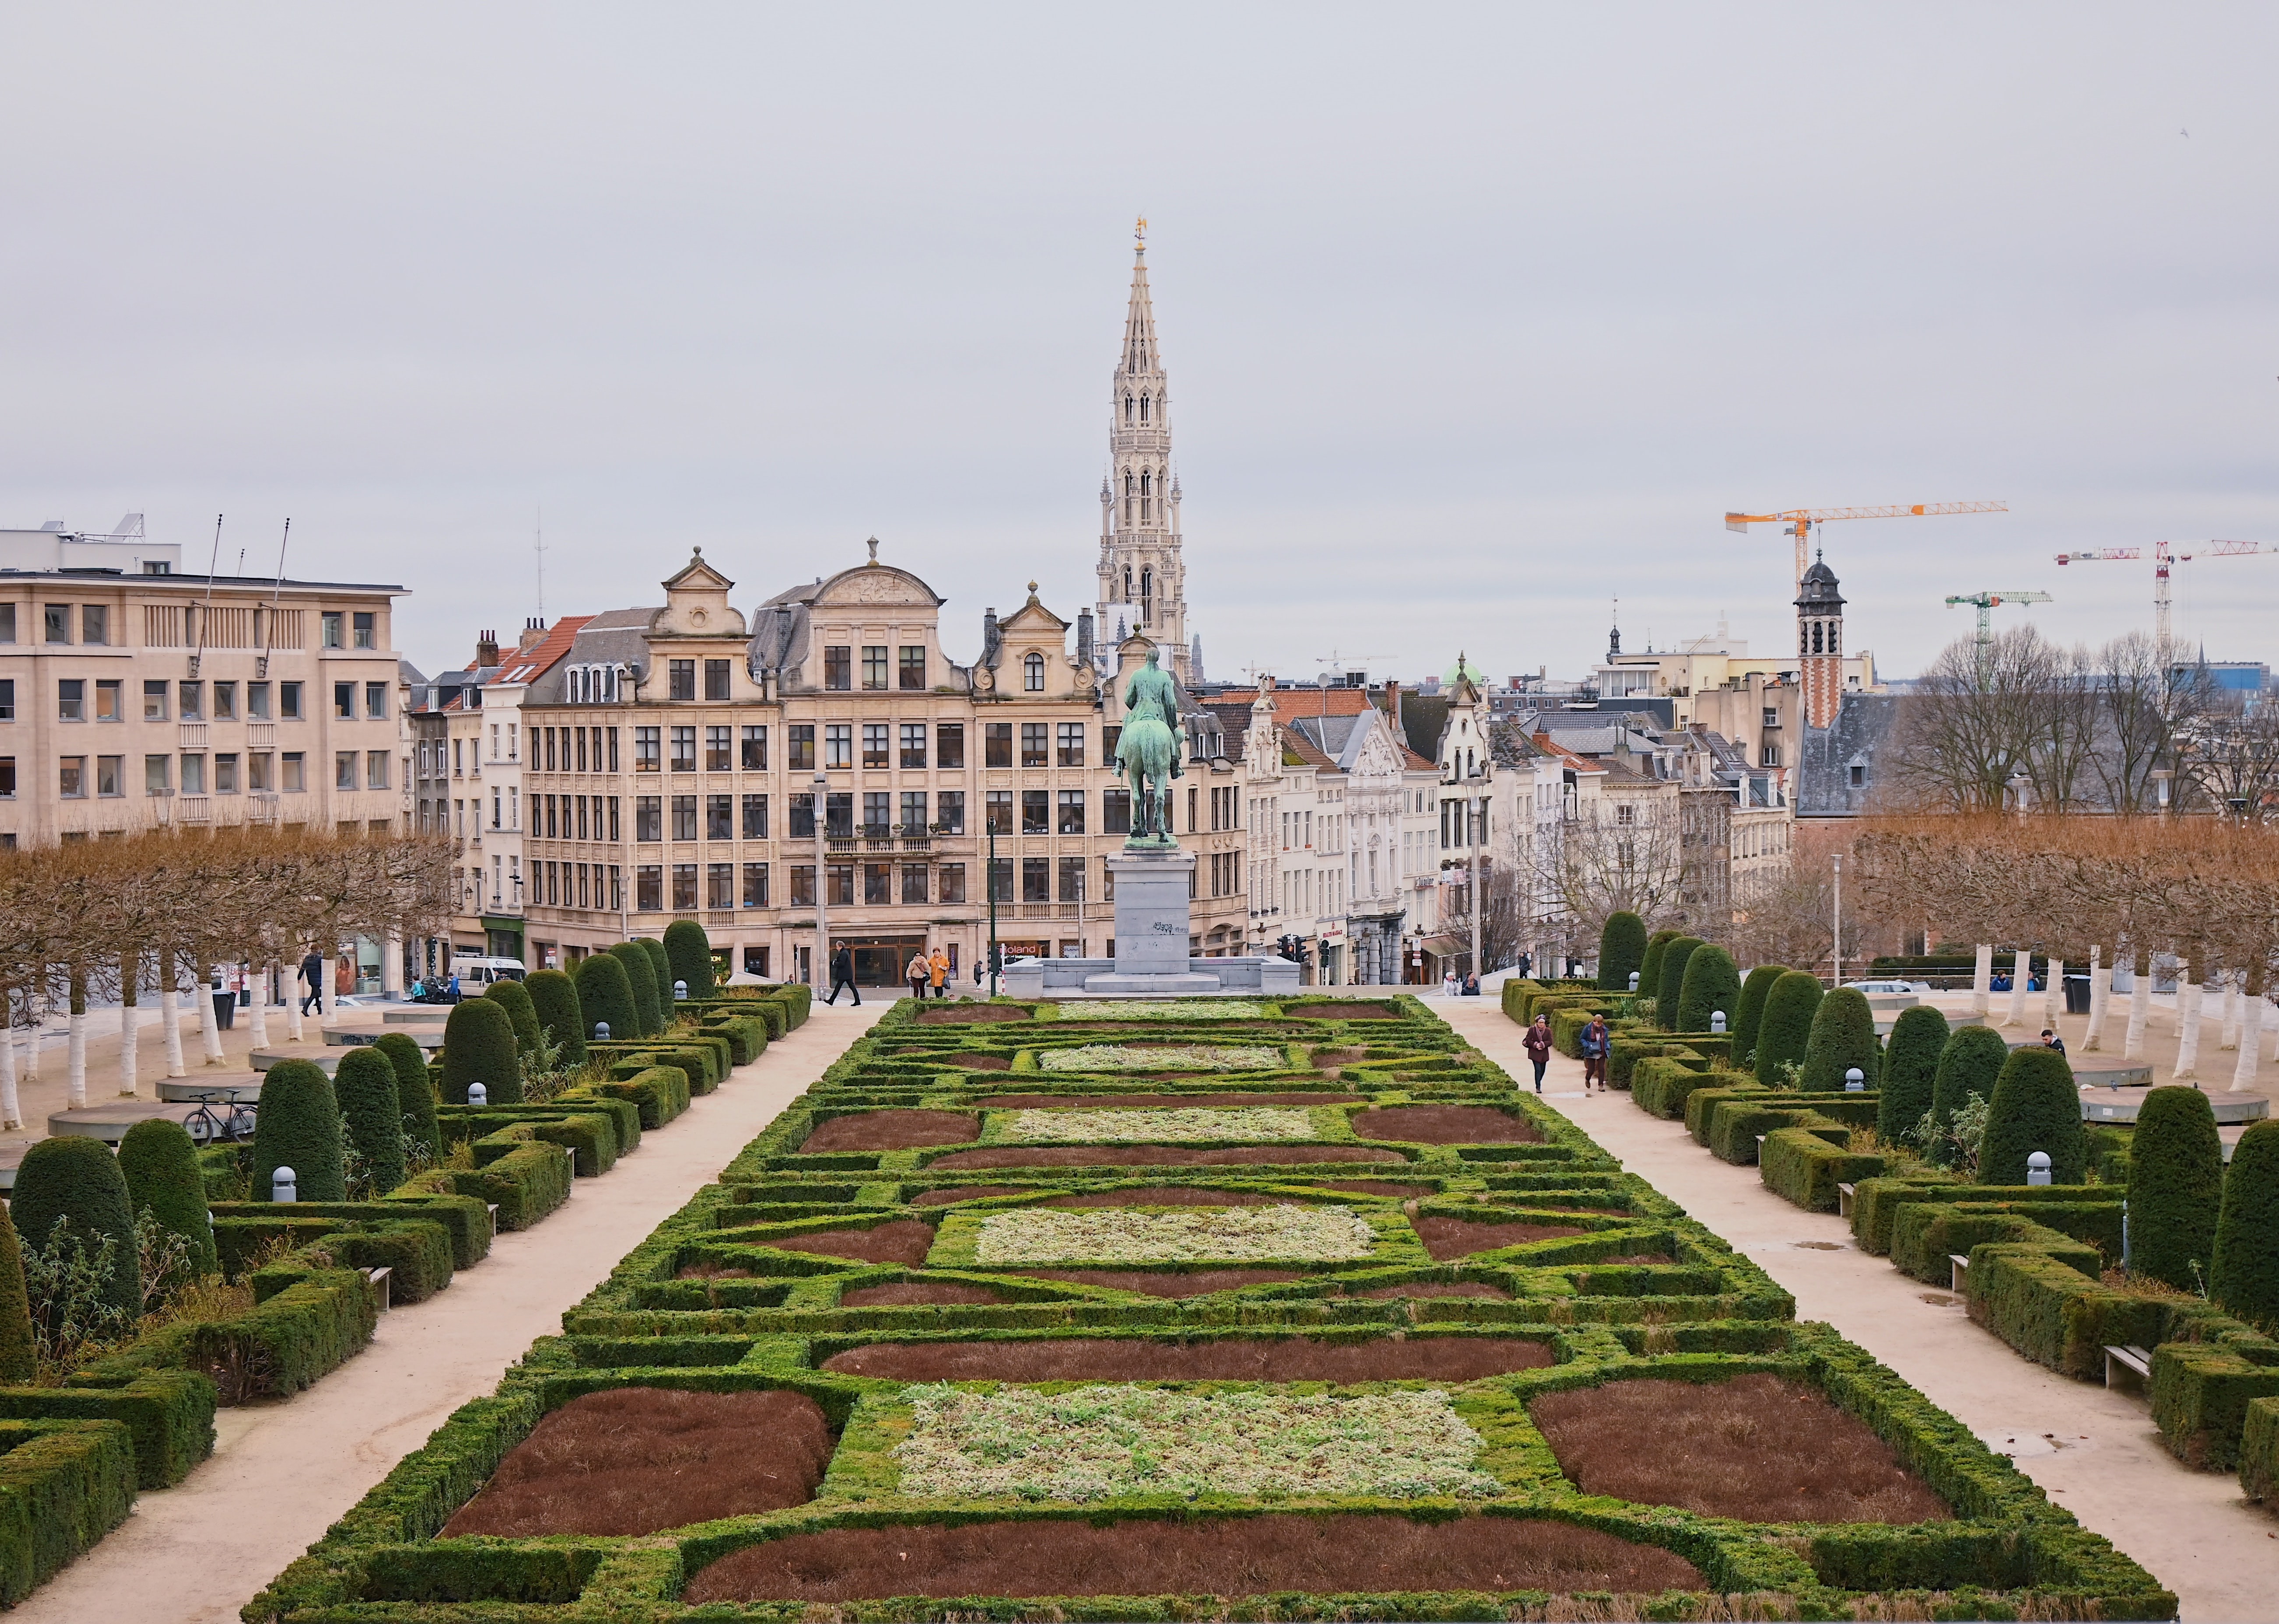 Brussels-belgium photo by Polly